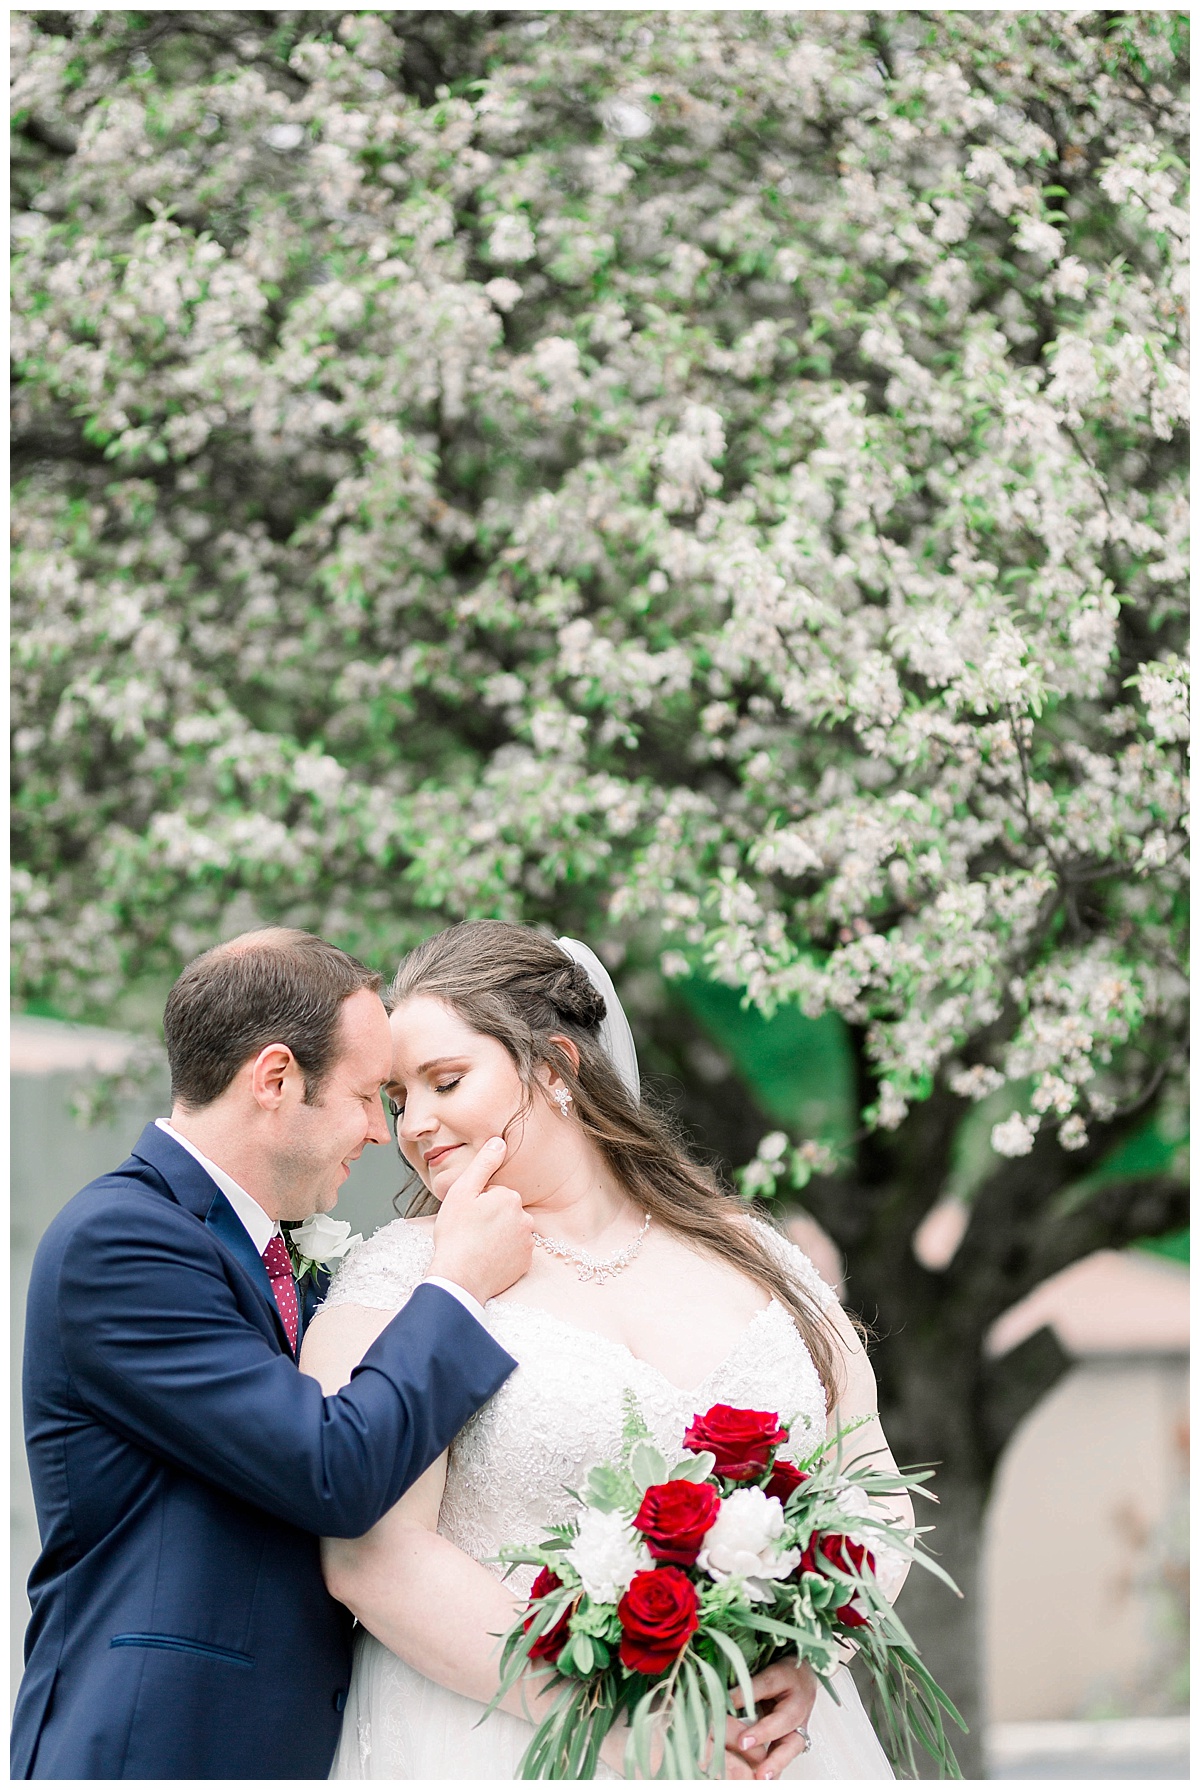 Davenport Country Club Wedding | Wedding Venues in the Quad Cities | Sarah Sunstrom Photography_0014.jpg